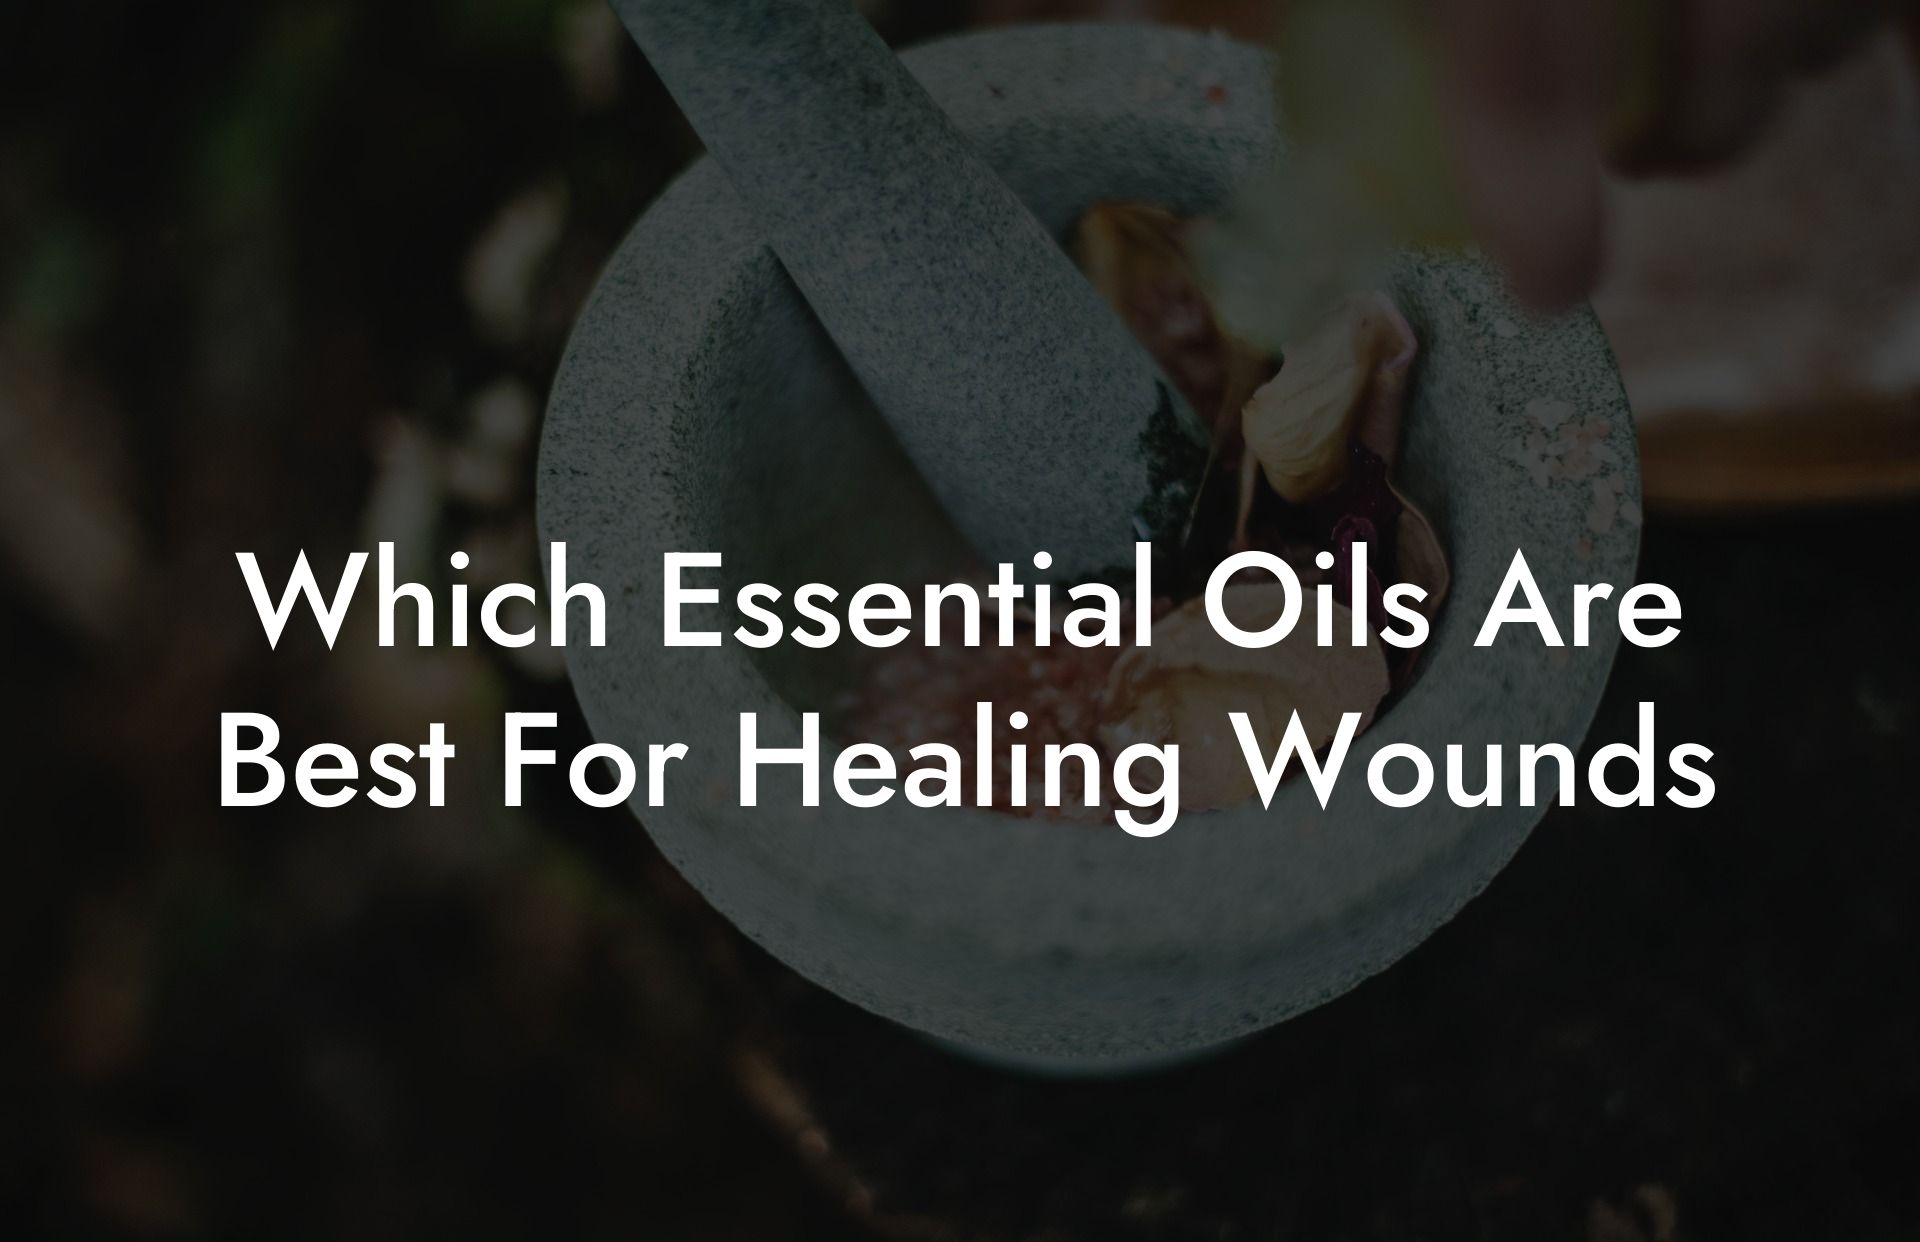 Which Essential Oils Are Best For Healing Wounds